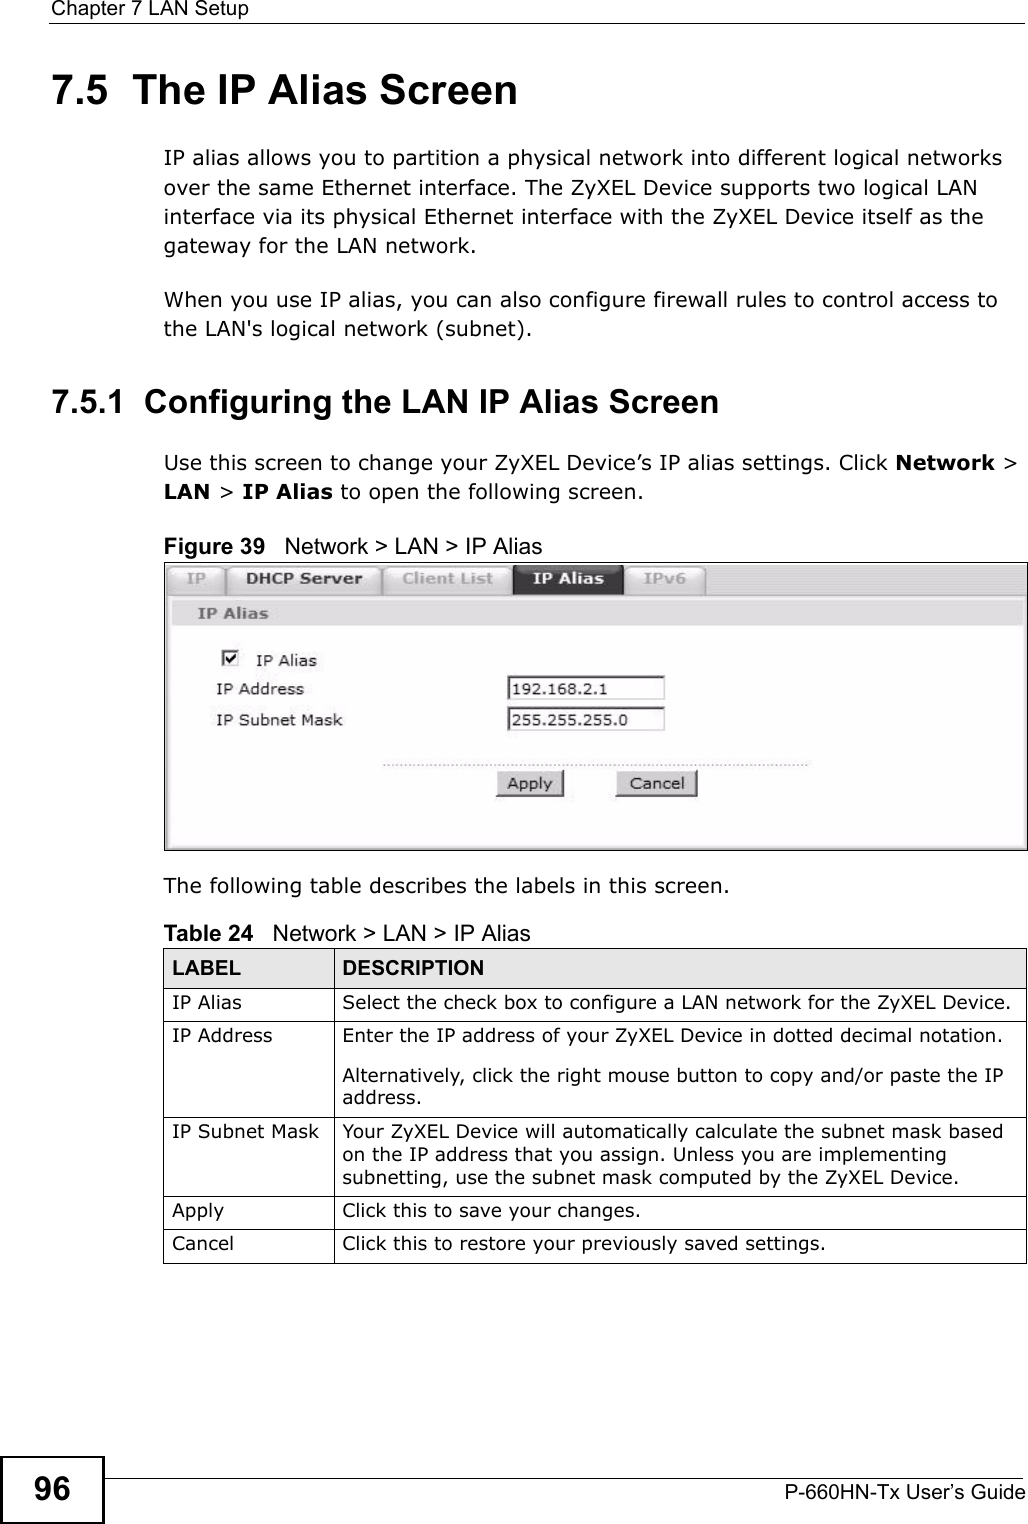 Chapter 7 LAN SetupP-660HN-Tx User’s Guide967.5  The IP Alias ScreenIP alias allows you to partition a physical network into different logical networks over the same Ethernet interface. The ZyXEL Device supports two logical LAN interface via its physical Ethernet interface with the ZyXEL Device itself as the gateway for the LAN network.When you use IP alias, you can also configure firewall rules to control access to the LAN&apos;s logical network (subnet).7.5.1  Configuring the LAN IP Alias ScreenUse this screen to change your ZyXEL Device’s IP alias settings. Click Network &gt; LAN &gt; IP Alias to open the following screen.Figure 39   Network &gt; LAN &gt; IP AliasThe following table describes the labels in this screen. Table 24   Network &gt; LAN &gt; IP Alias LABEL DESCRIPTIONIP Alias  Select the check box to configure a LAN network for the ZyXEL Device.IP Address Enter the IP address of your ZyXEL Device in dotted decimal notation. Alternatively, click the right mouse button to copy and/or paste the IP address.IP Subnet Mask Your ZyXEL Device will automatically calculate the subnet mask based on the IP address that you assign. Unless you are implementing subnetting, use the subnet mask computed by the ZyXEL Device.Apply Click this to save your changes.Cancel Click this to restore your previously saved settings.